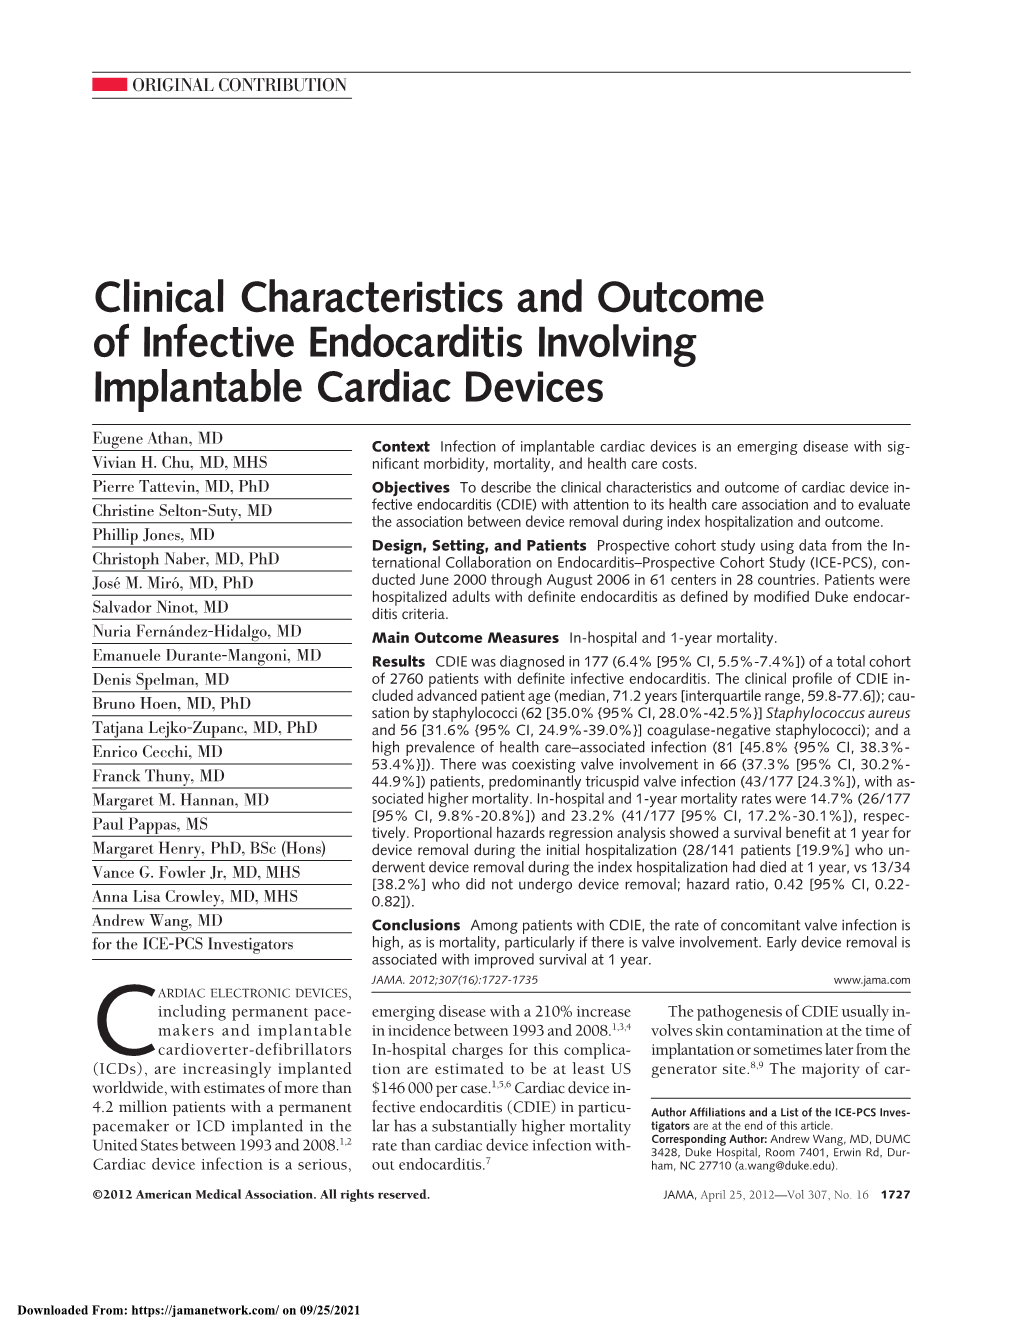 Clinical Characteristics and Outcome of Infective Endocarditis Involving Implantable Cardiac Devices